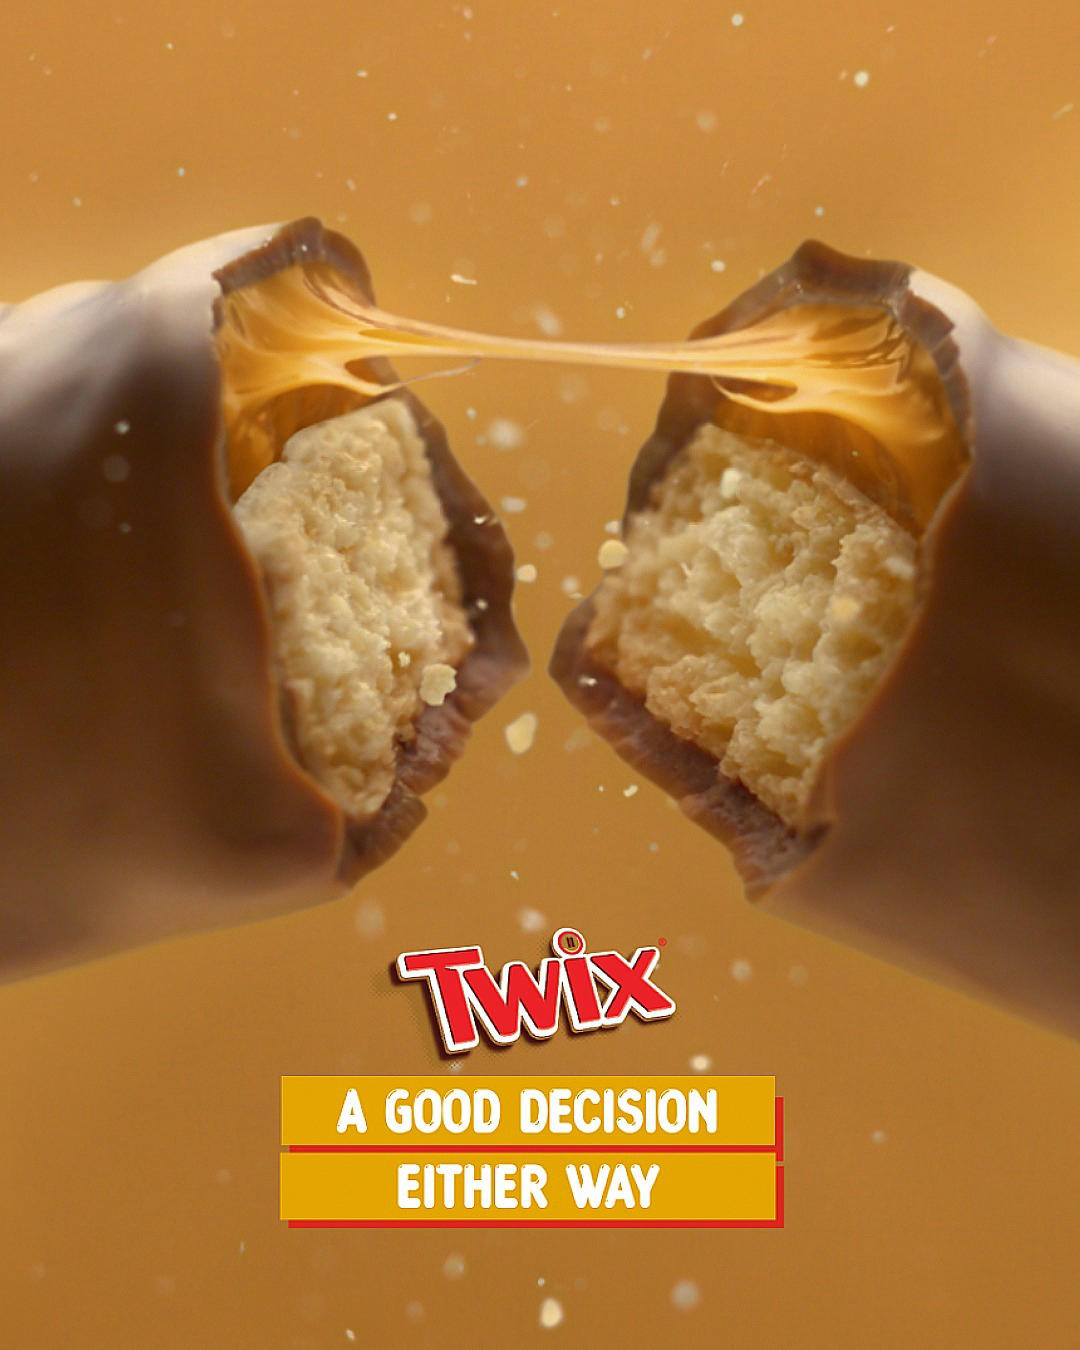 TWIX - No need to decide anymore